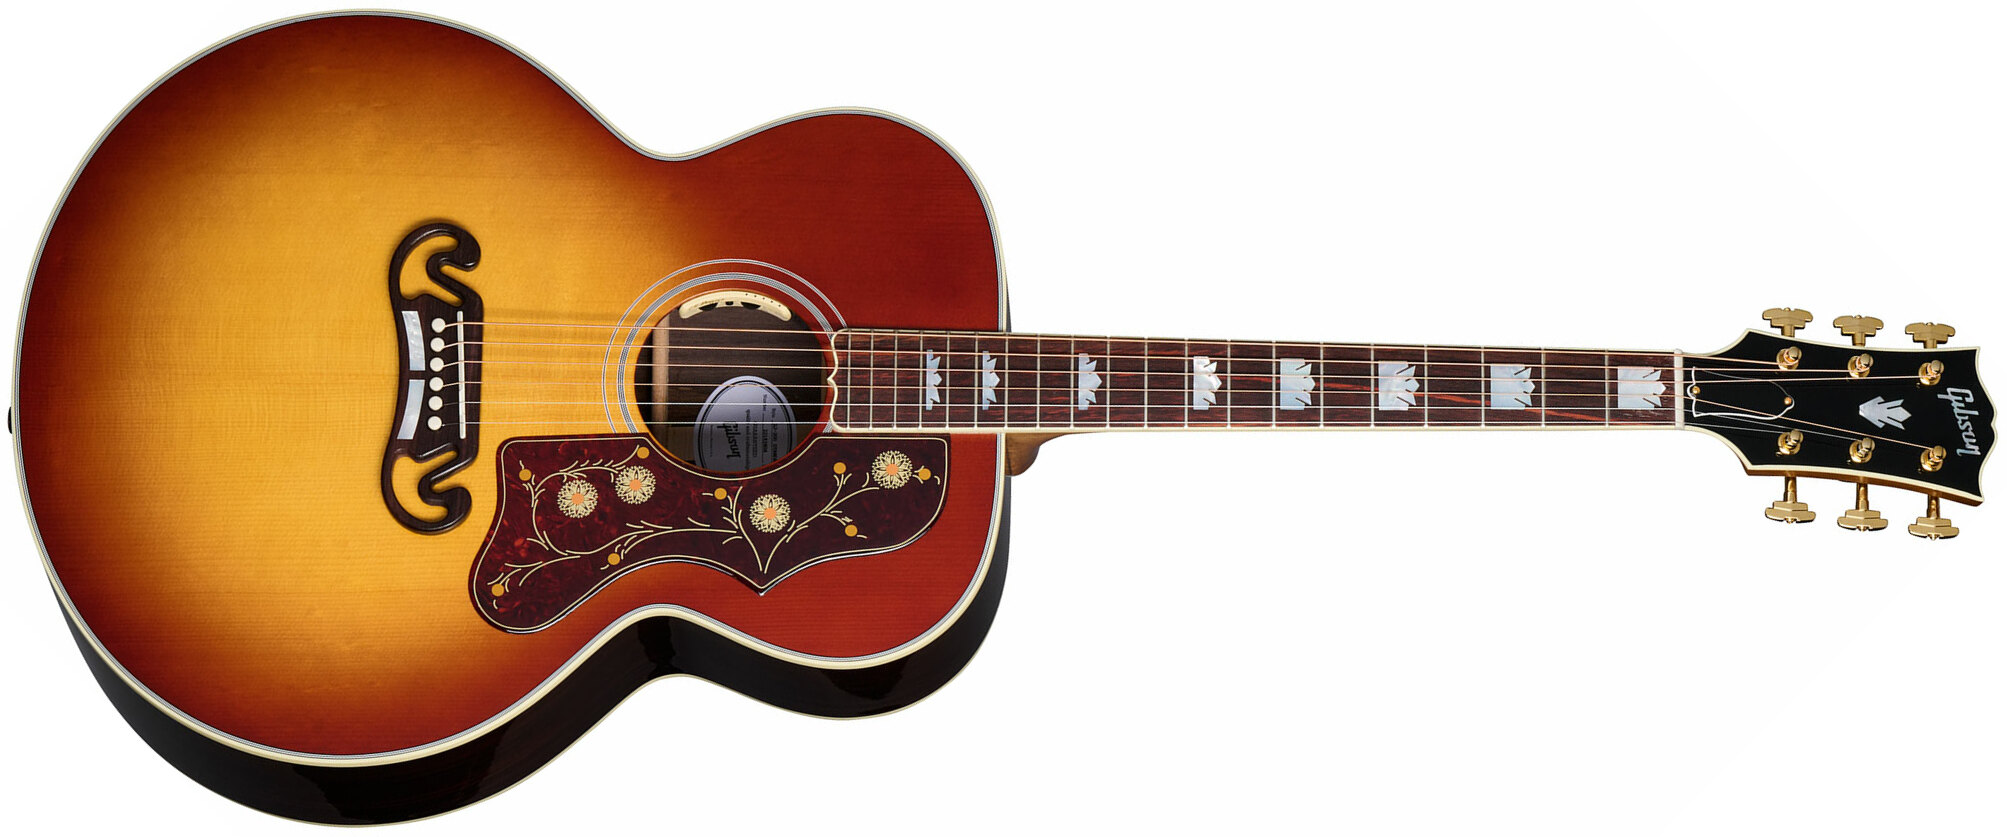 Gibson Sj-200 Standard Rosewood Super Jumbo Epicea Palissandre Rw - Rosewood Burst - Guitare Electro Acoustique - Main picture